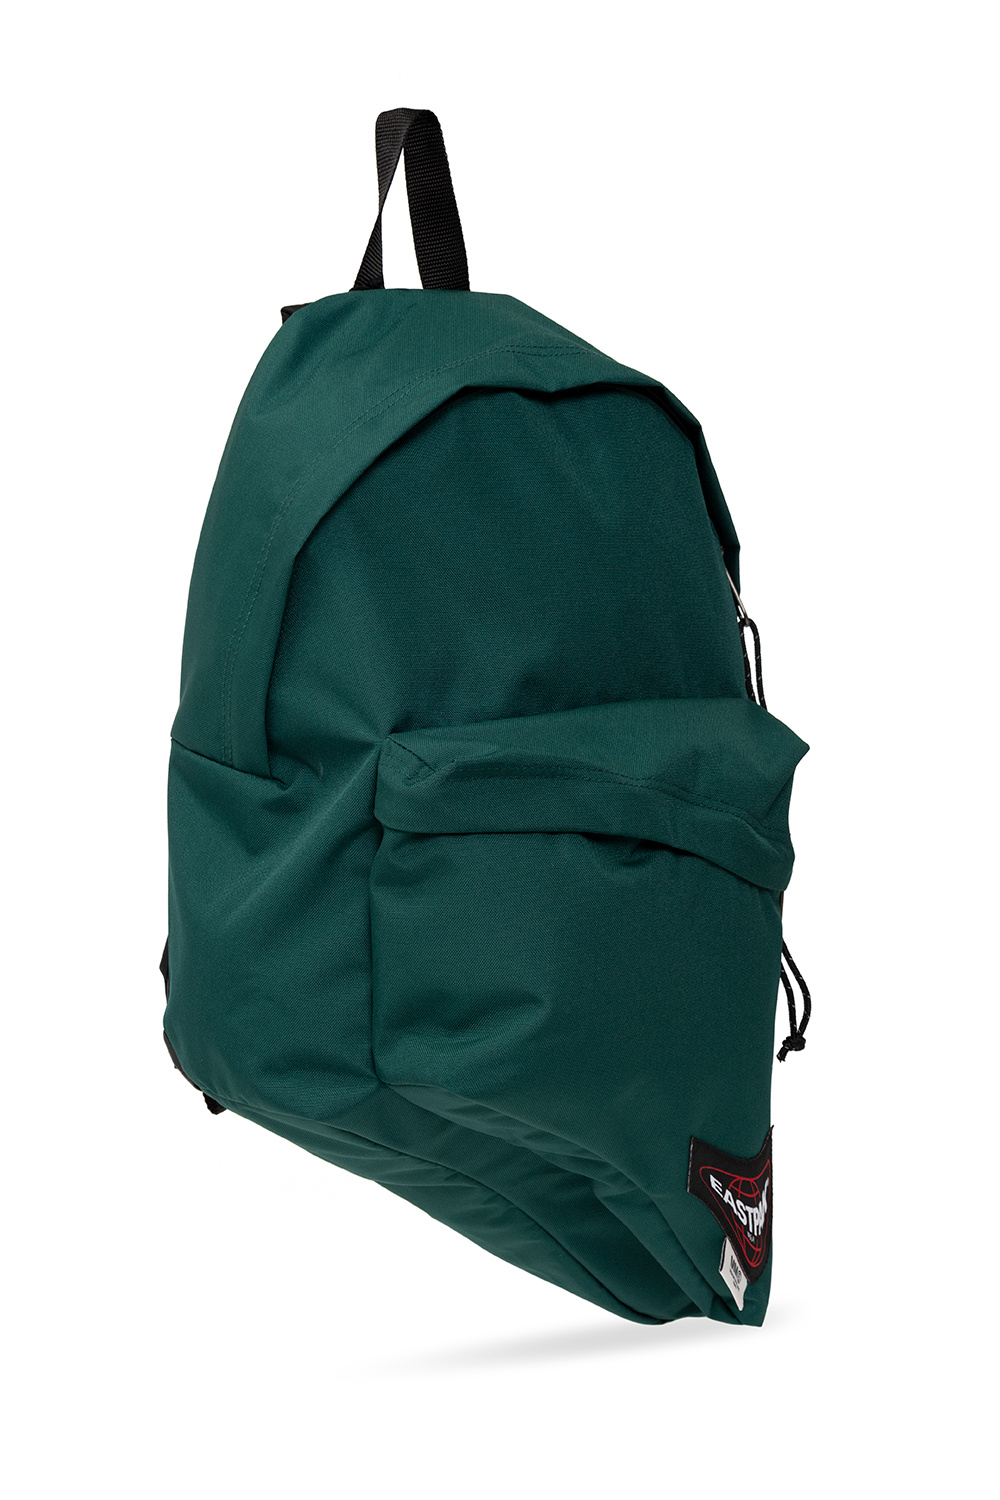 Pre-owned Lacoste Backpack In Green